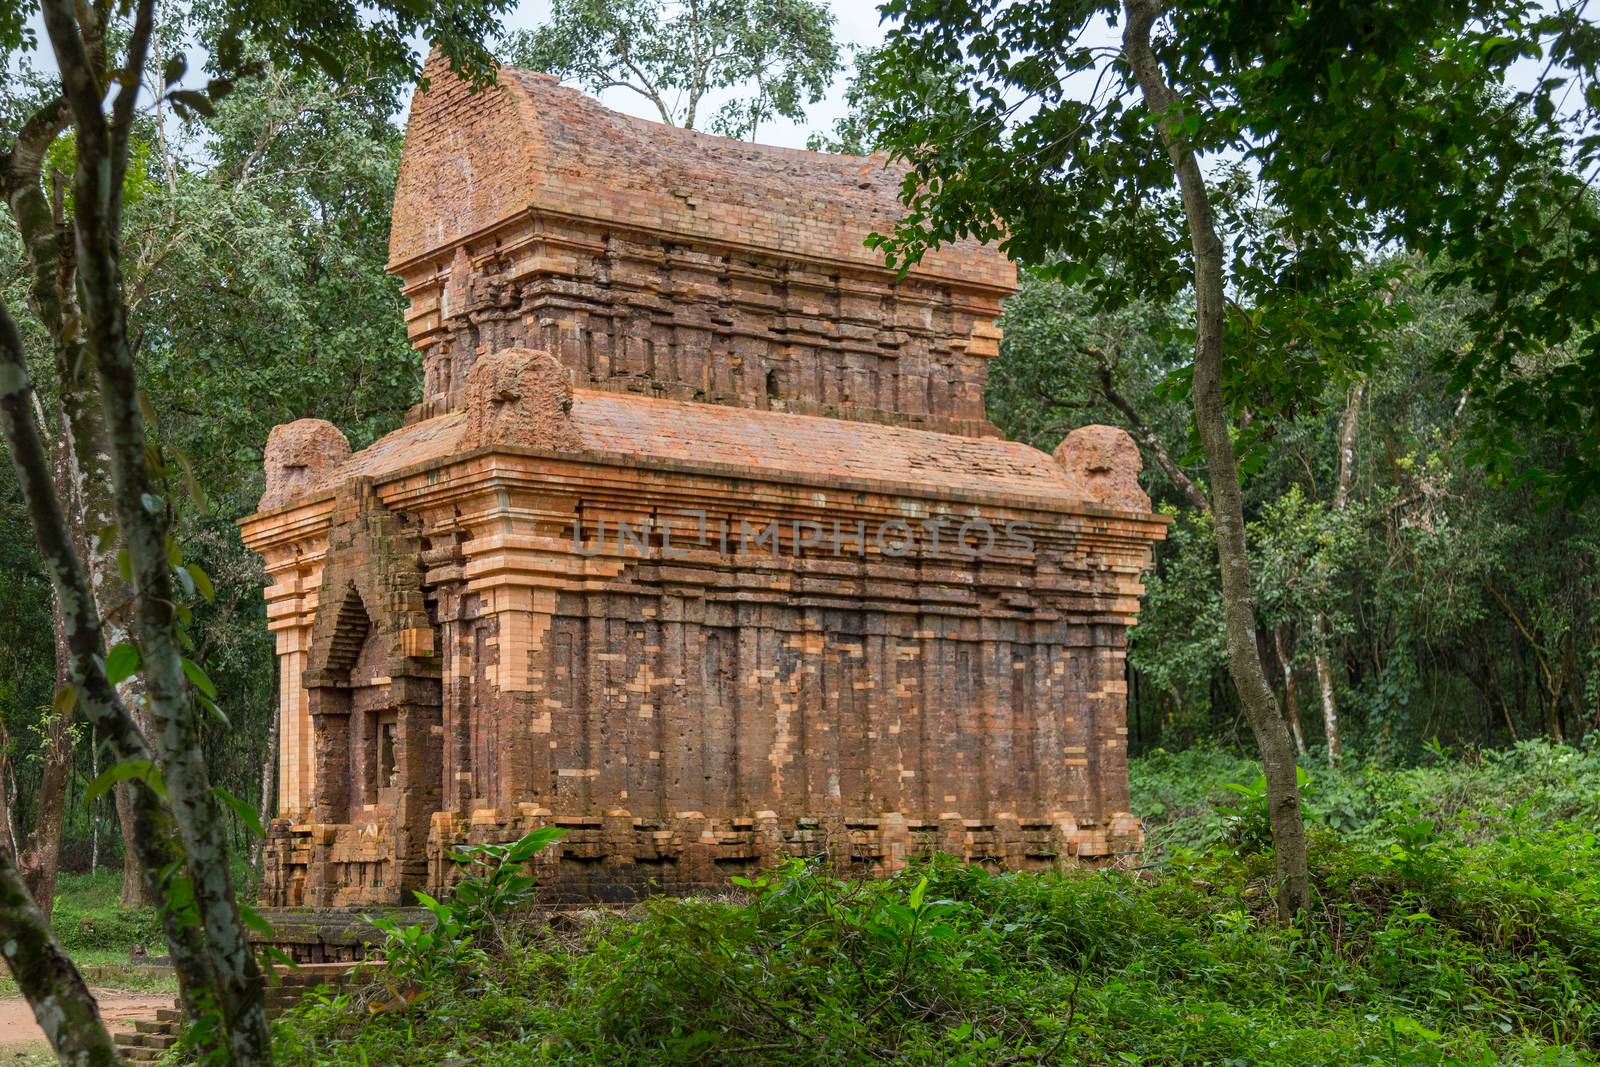 My Son, Red brick partially ruined Hindu temples in Quang Nam province, central Vietnam. The longest inhabited archaeological site in Indochina, 4th to the 14th century AD, the valley at My Son was a site of religious ceremony for kings of the ruling dynasties of Champa High quality photo